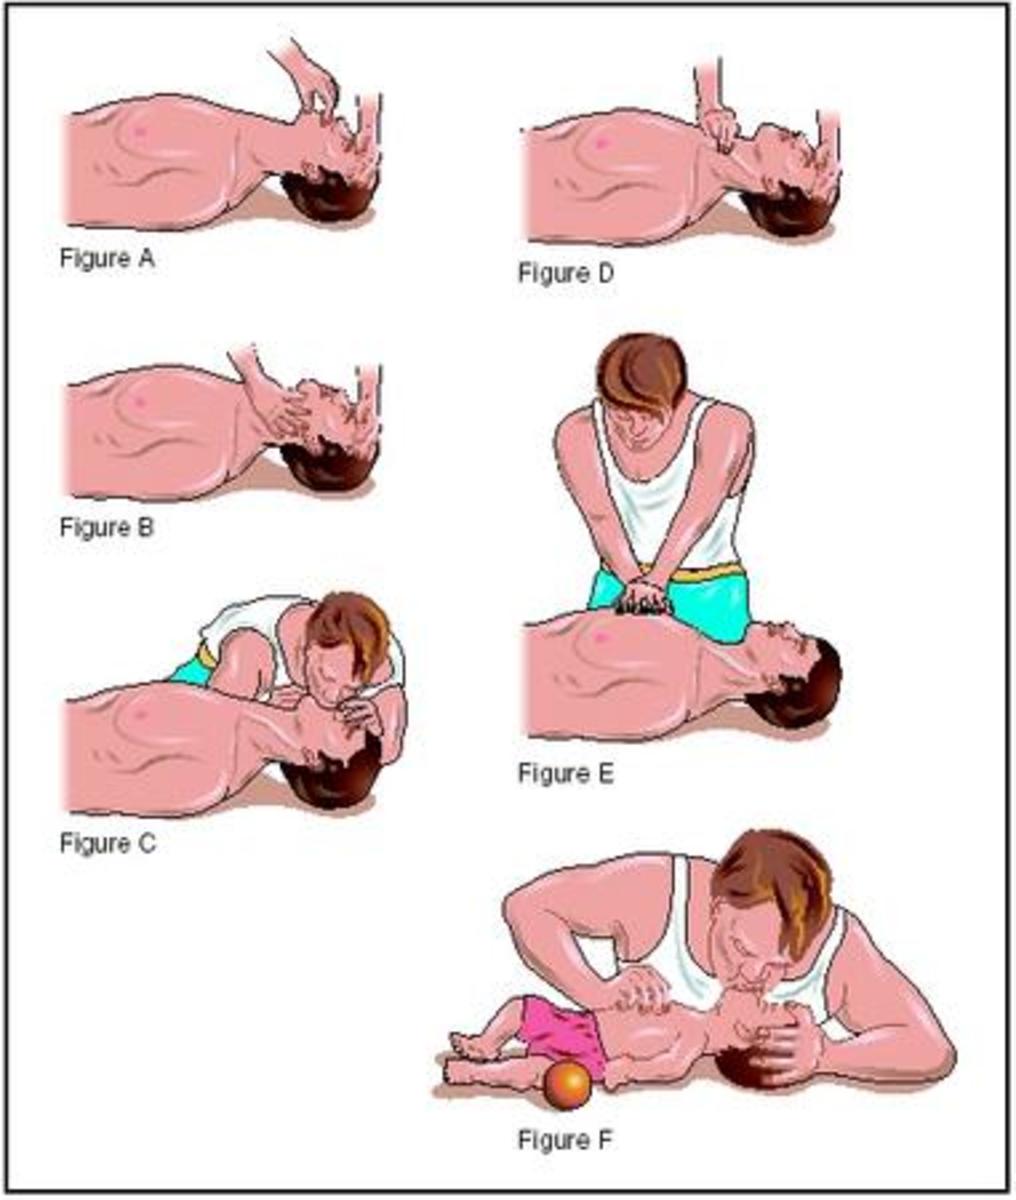 Illustrates the proper hand position and technique for the head tilt-chin lift, breathing, and chest compressions.   